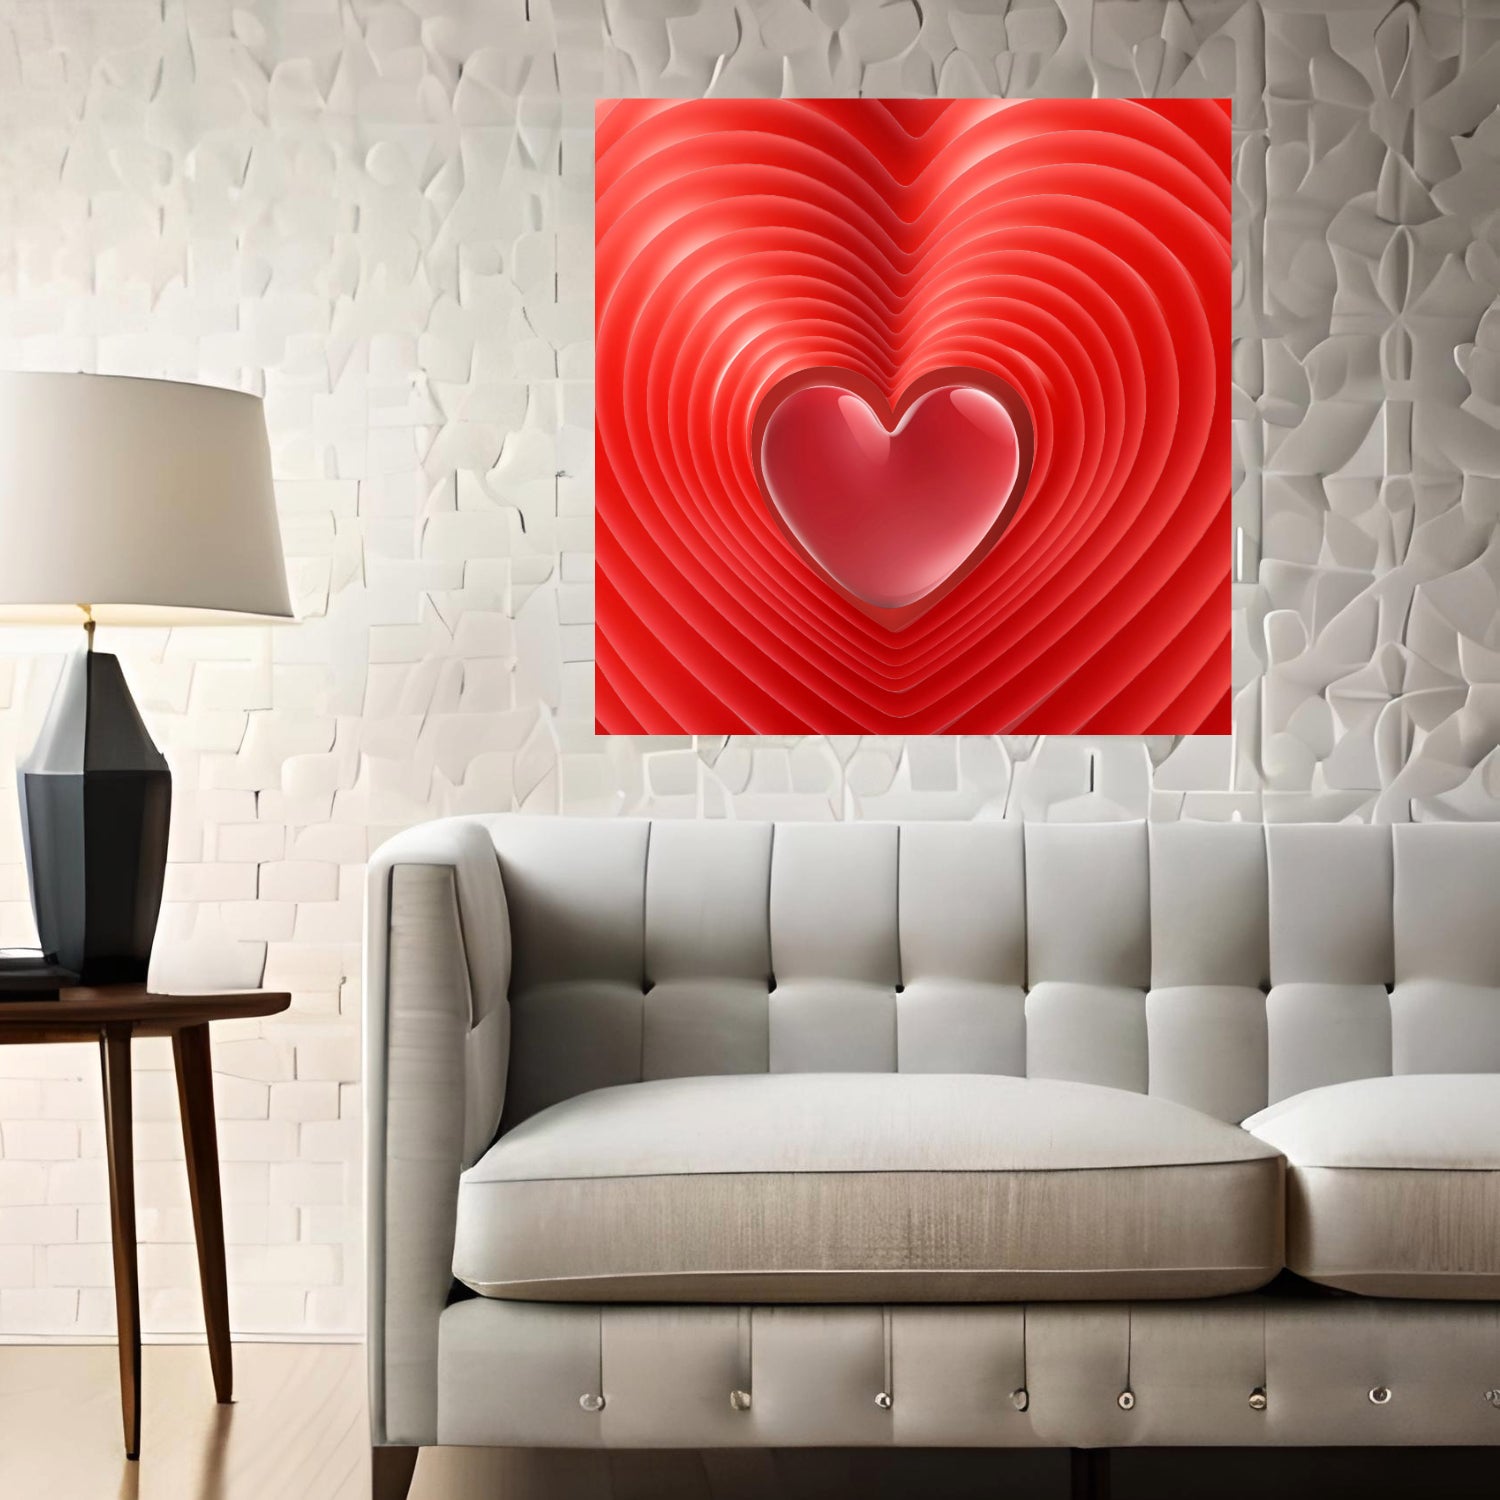 Wall Art INFINITE LOVE Canvas Print Painting Original Giclee 32X32 GW Love Nice Beauty Fun Design Fit Hot House Home Office Gift Ready Hang Living